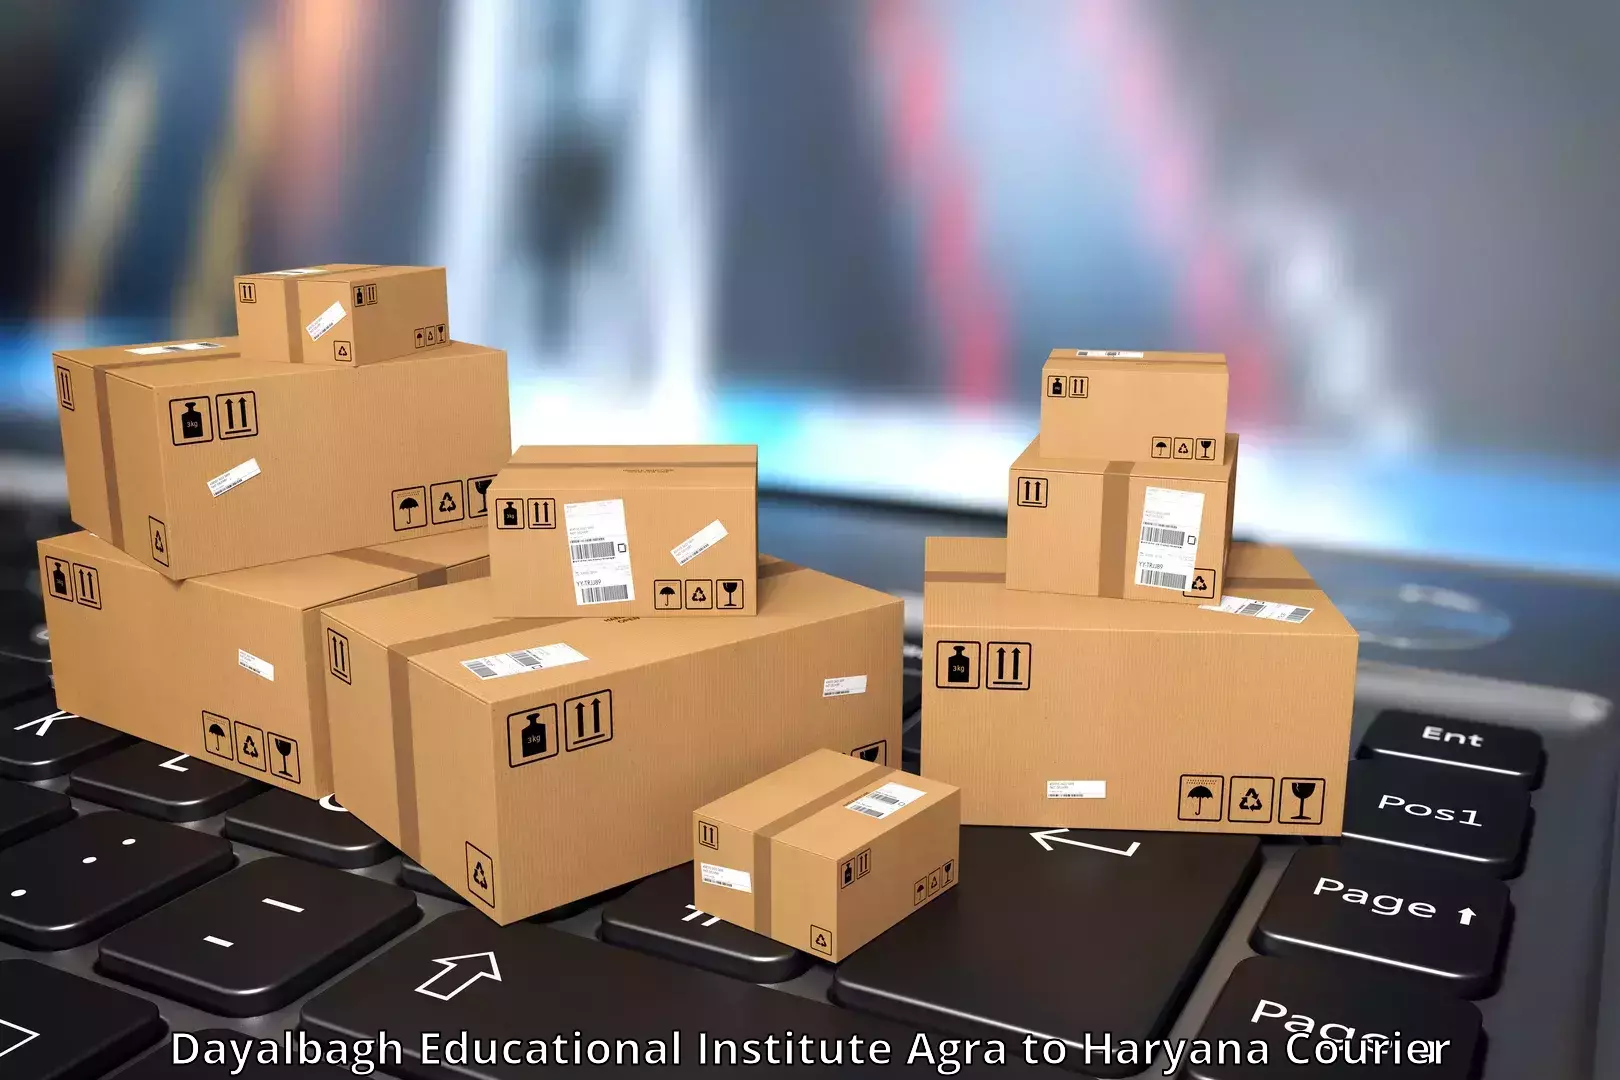 Express package transport Dayalbagh Educational Institute Agra to Gurgaon